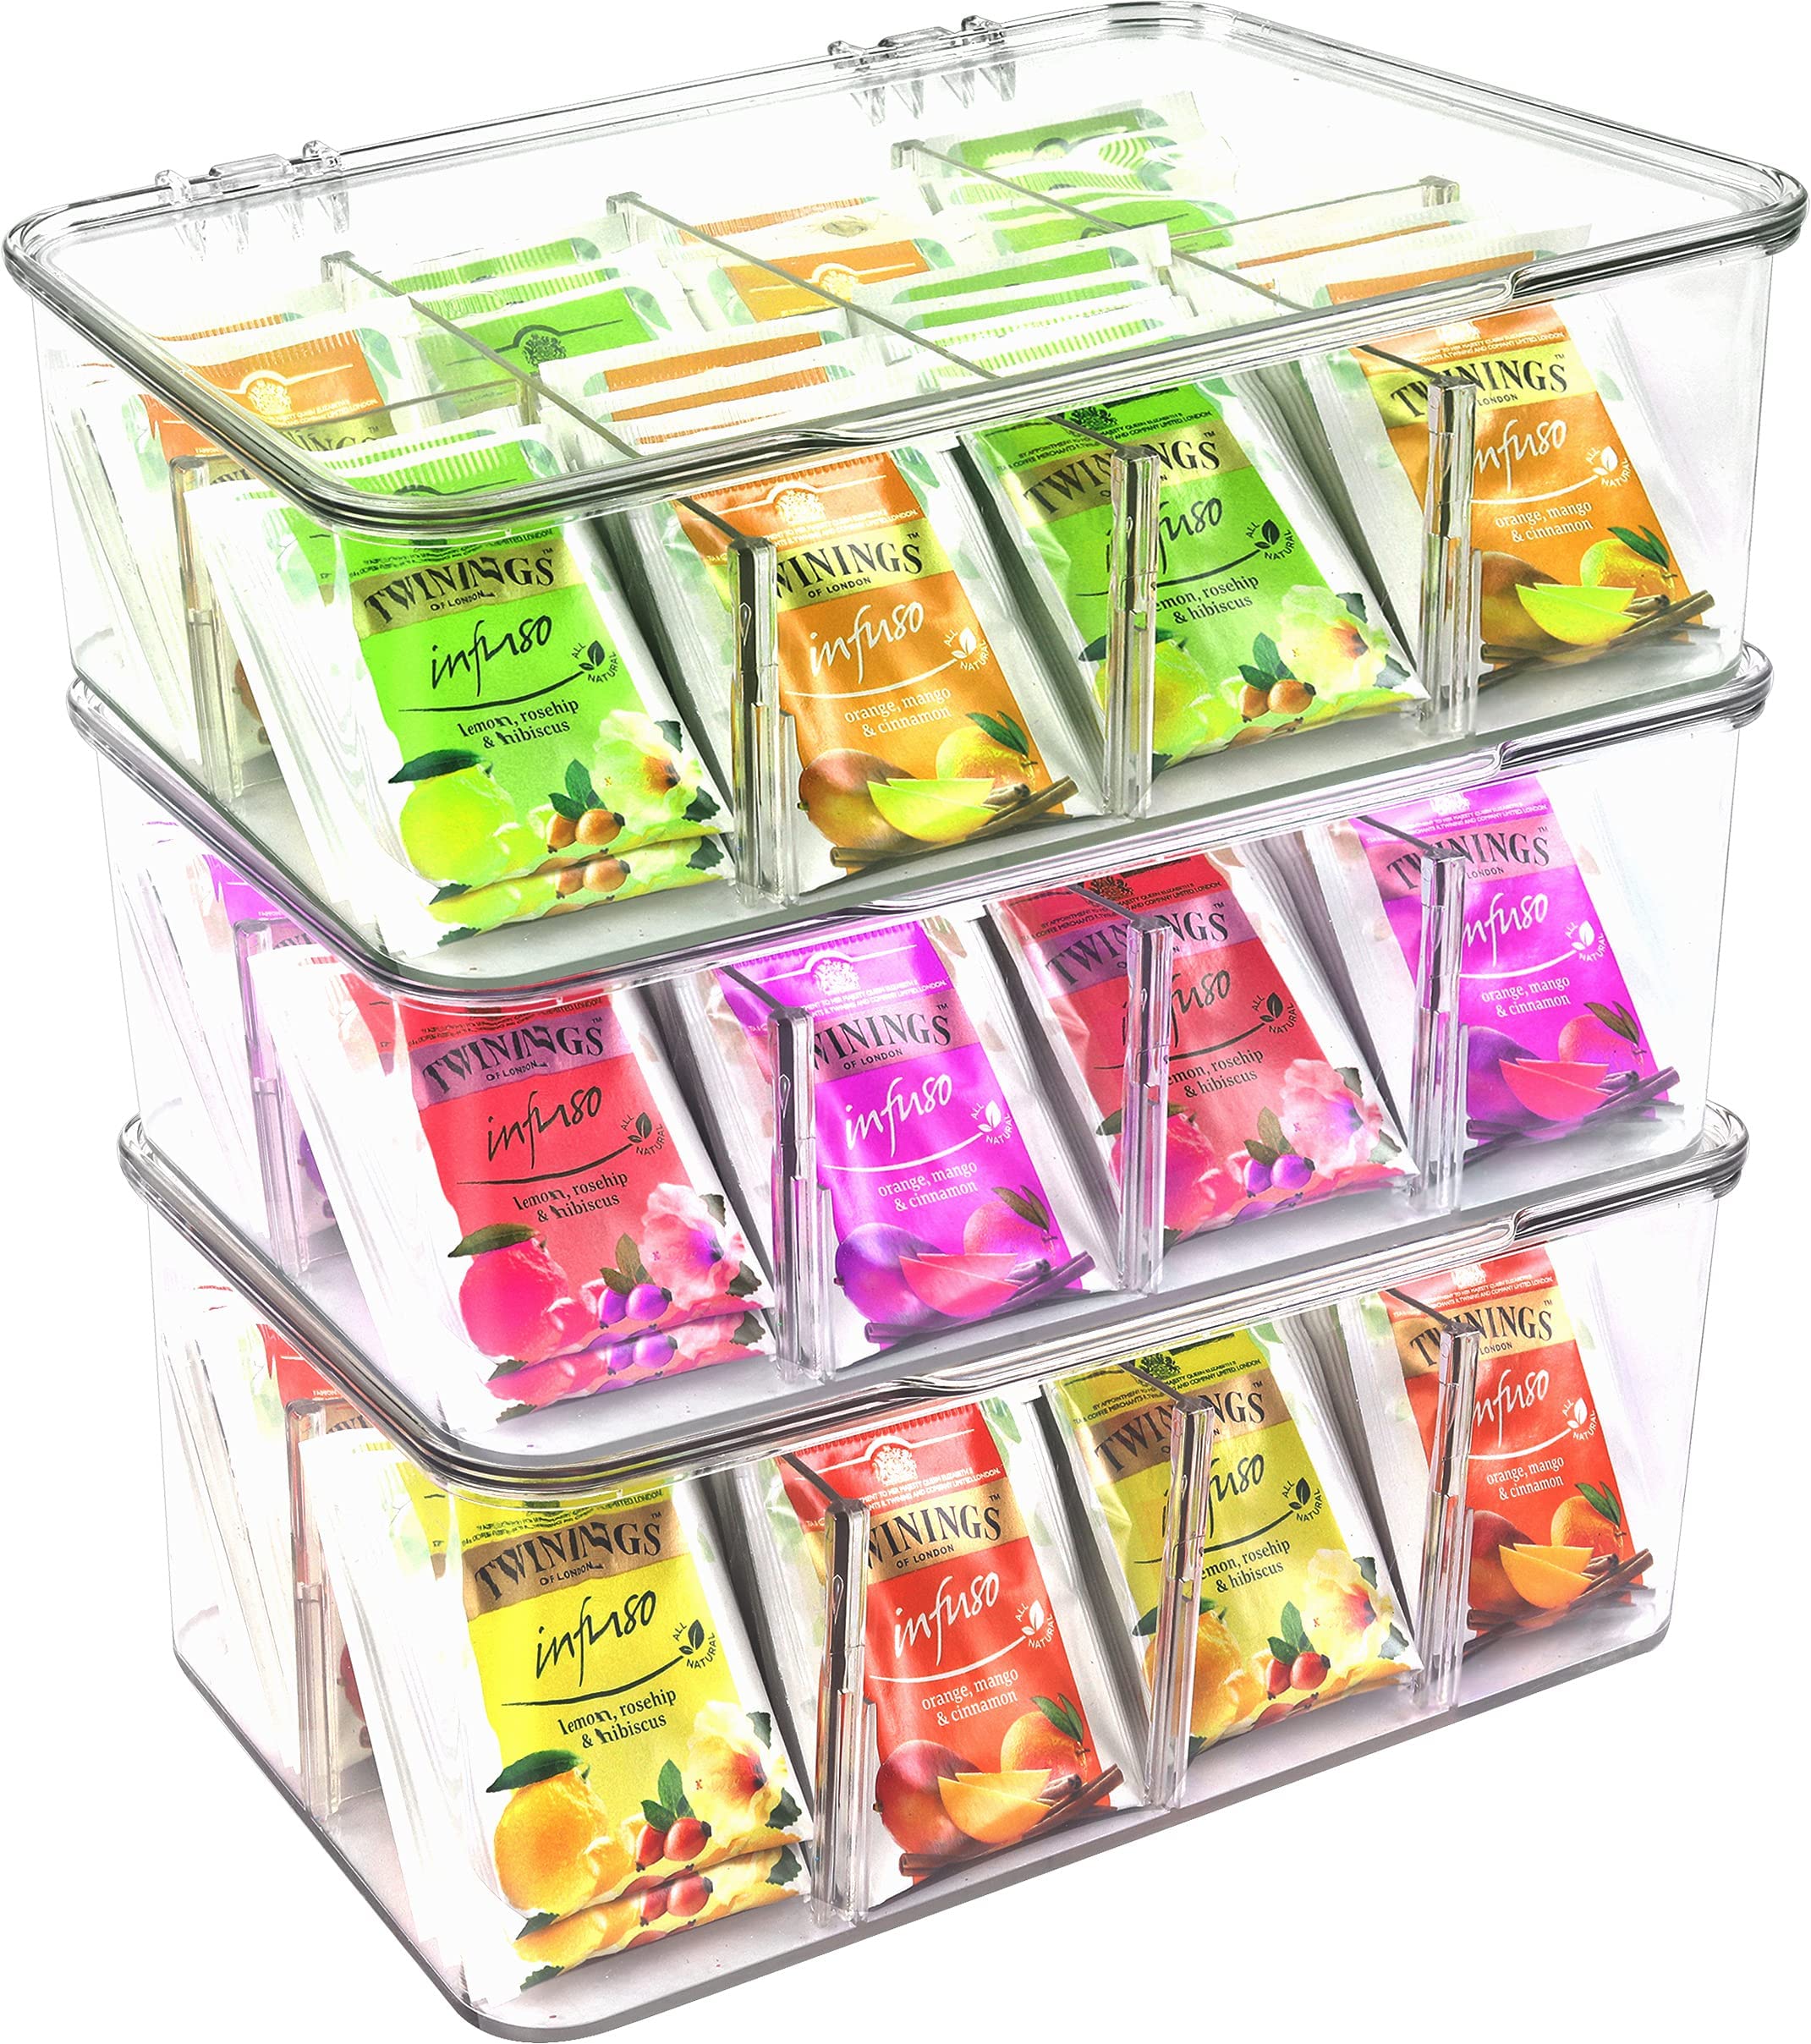 Utopia Home Set of 11 Organizers-8 Pantry Organizers (4 Large & 4 Small Drawers) & 3 Stackable Tea Bag Organizer Box with Clear Top Lids - Plastic Storage Racks for Freezers, Kitchen and Cabinets